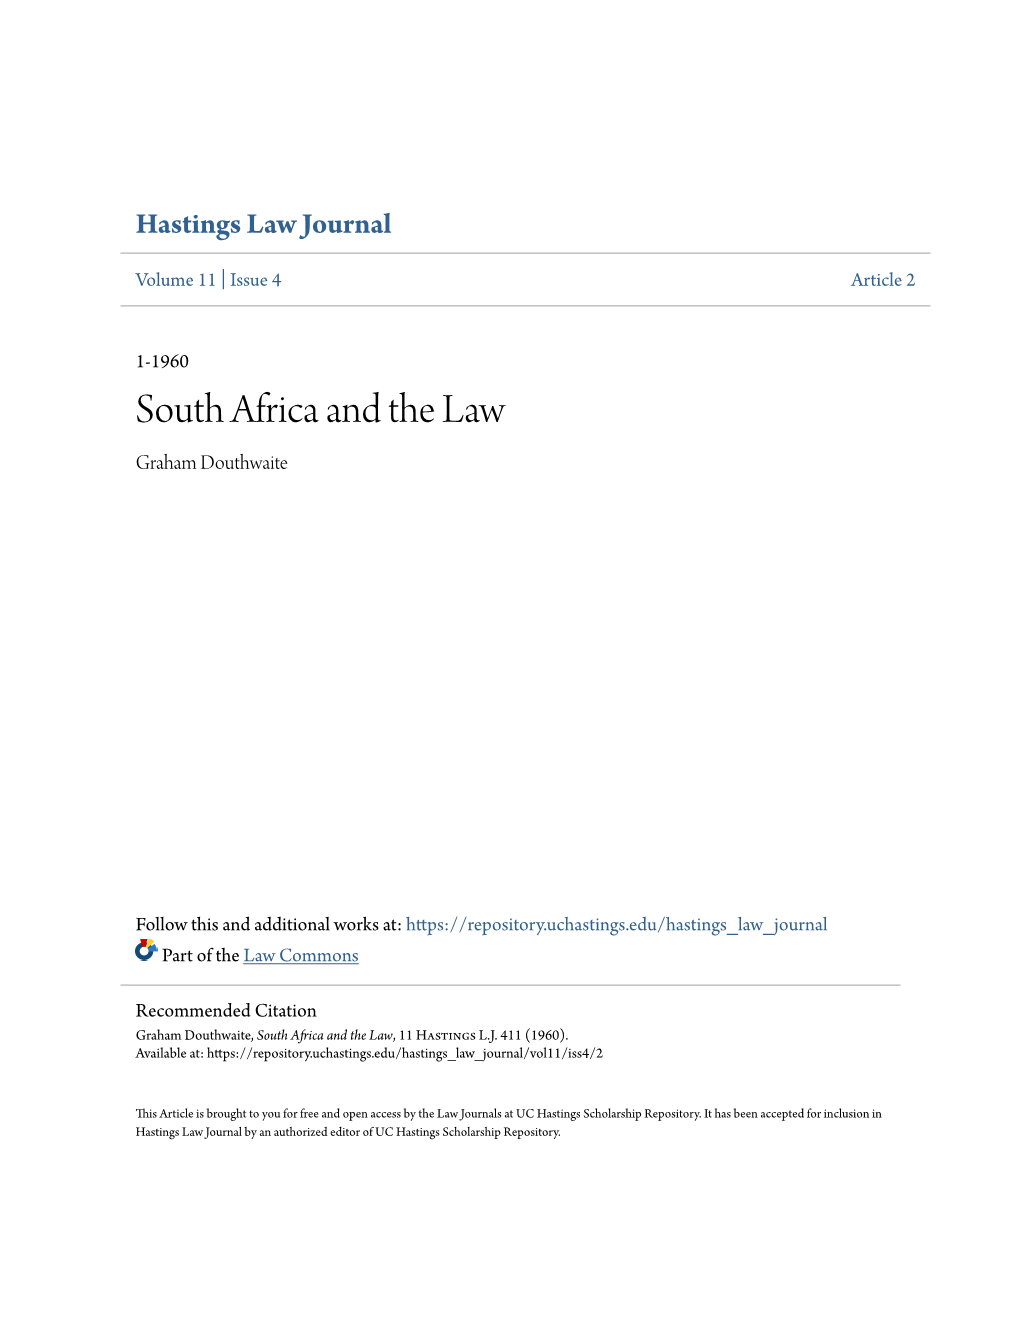 South Africa and the Law Graham Douthwaite